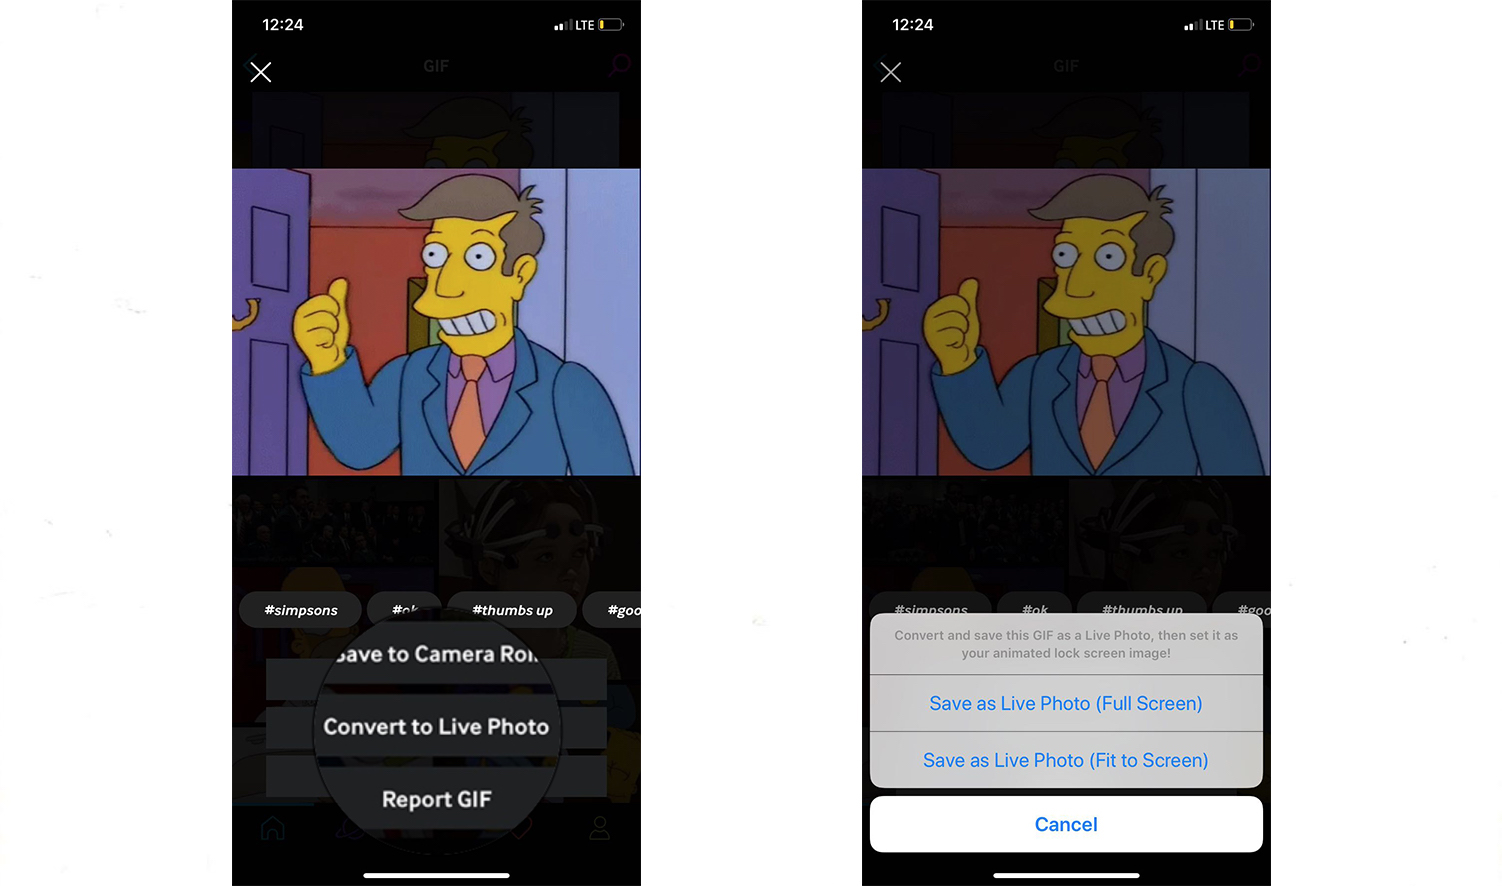 GIPHY to turn GIFs into Live Photos